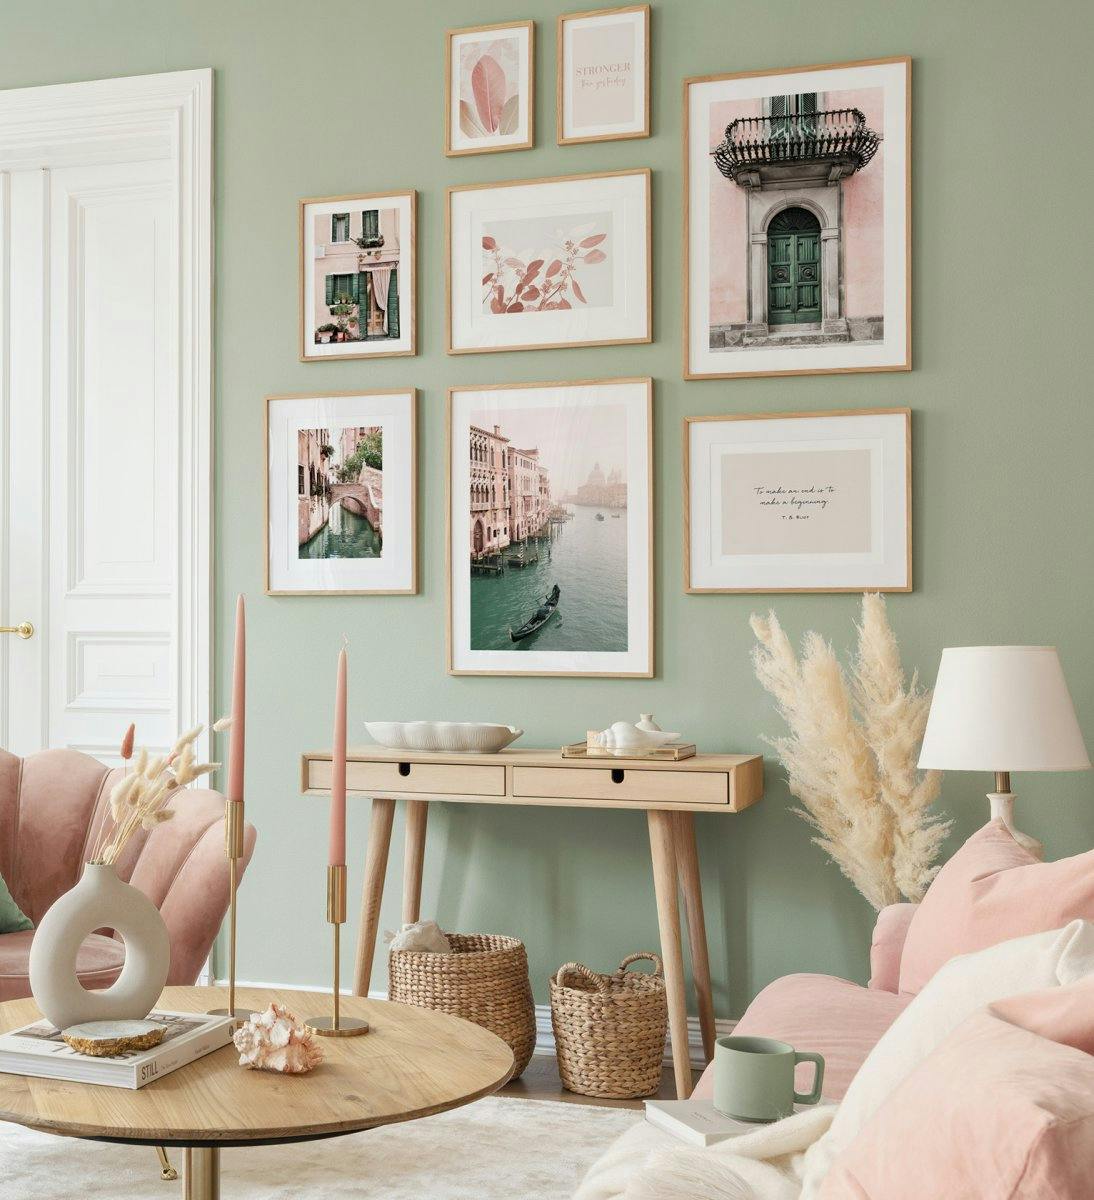 Photographs in pastel colors create a playful and fresh vibe in the living room